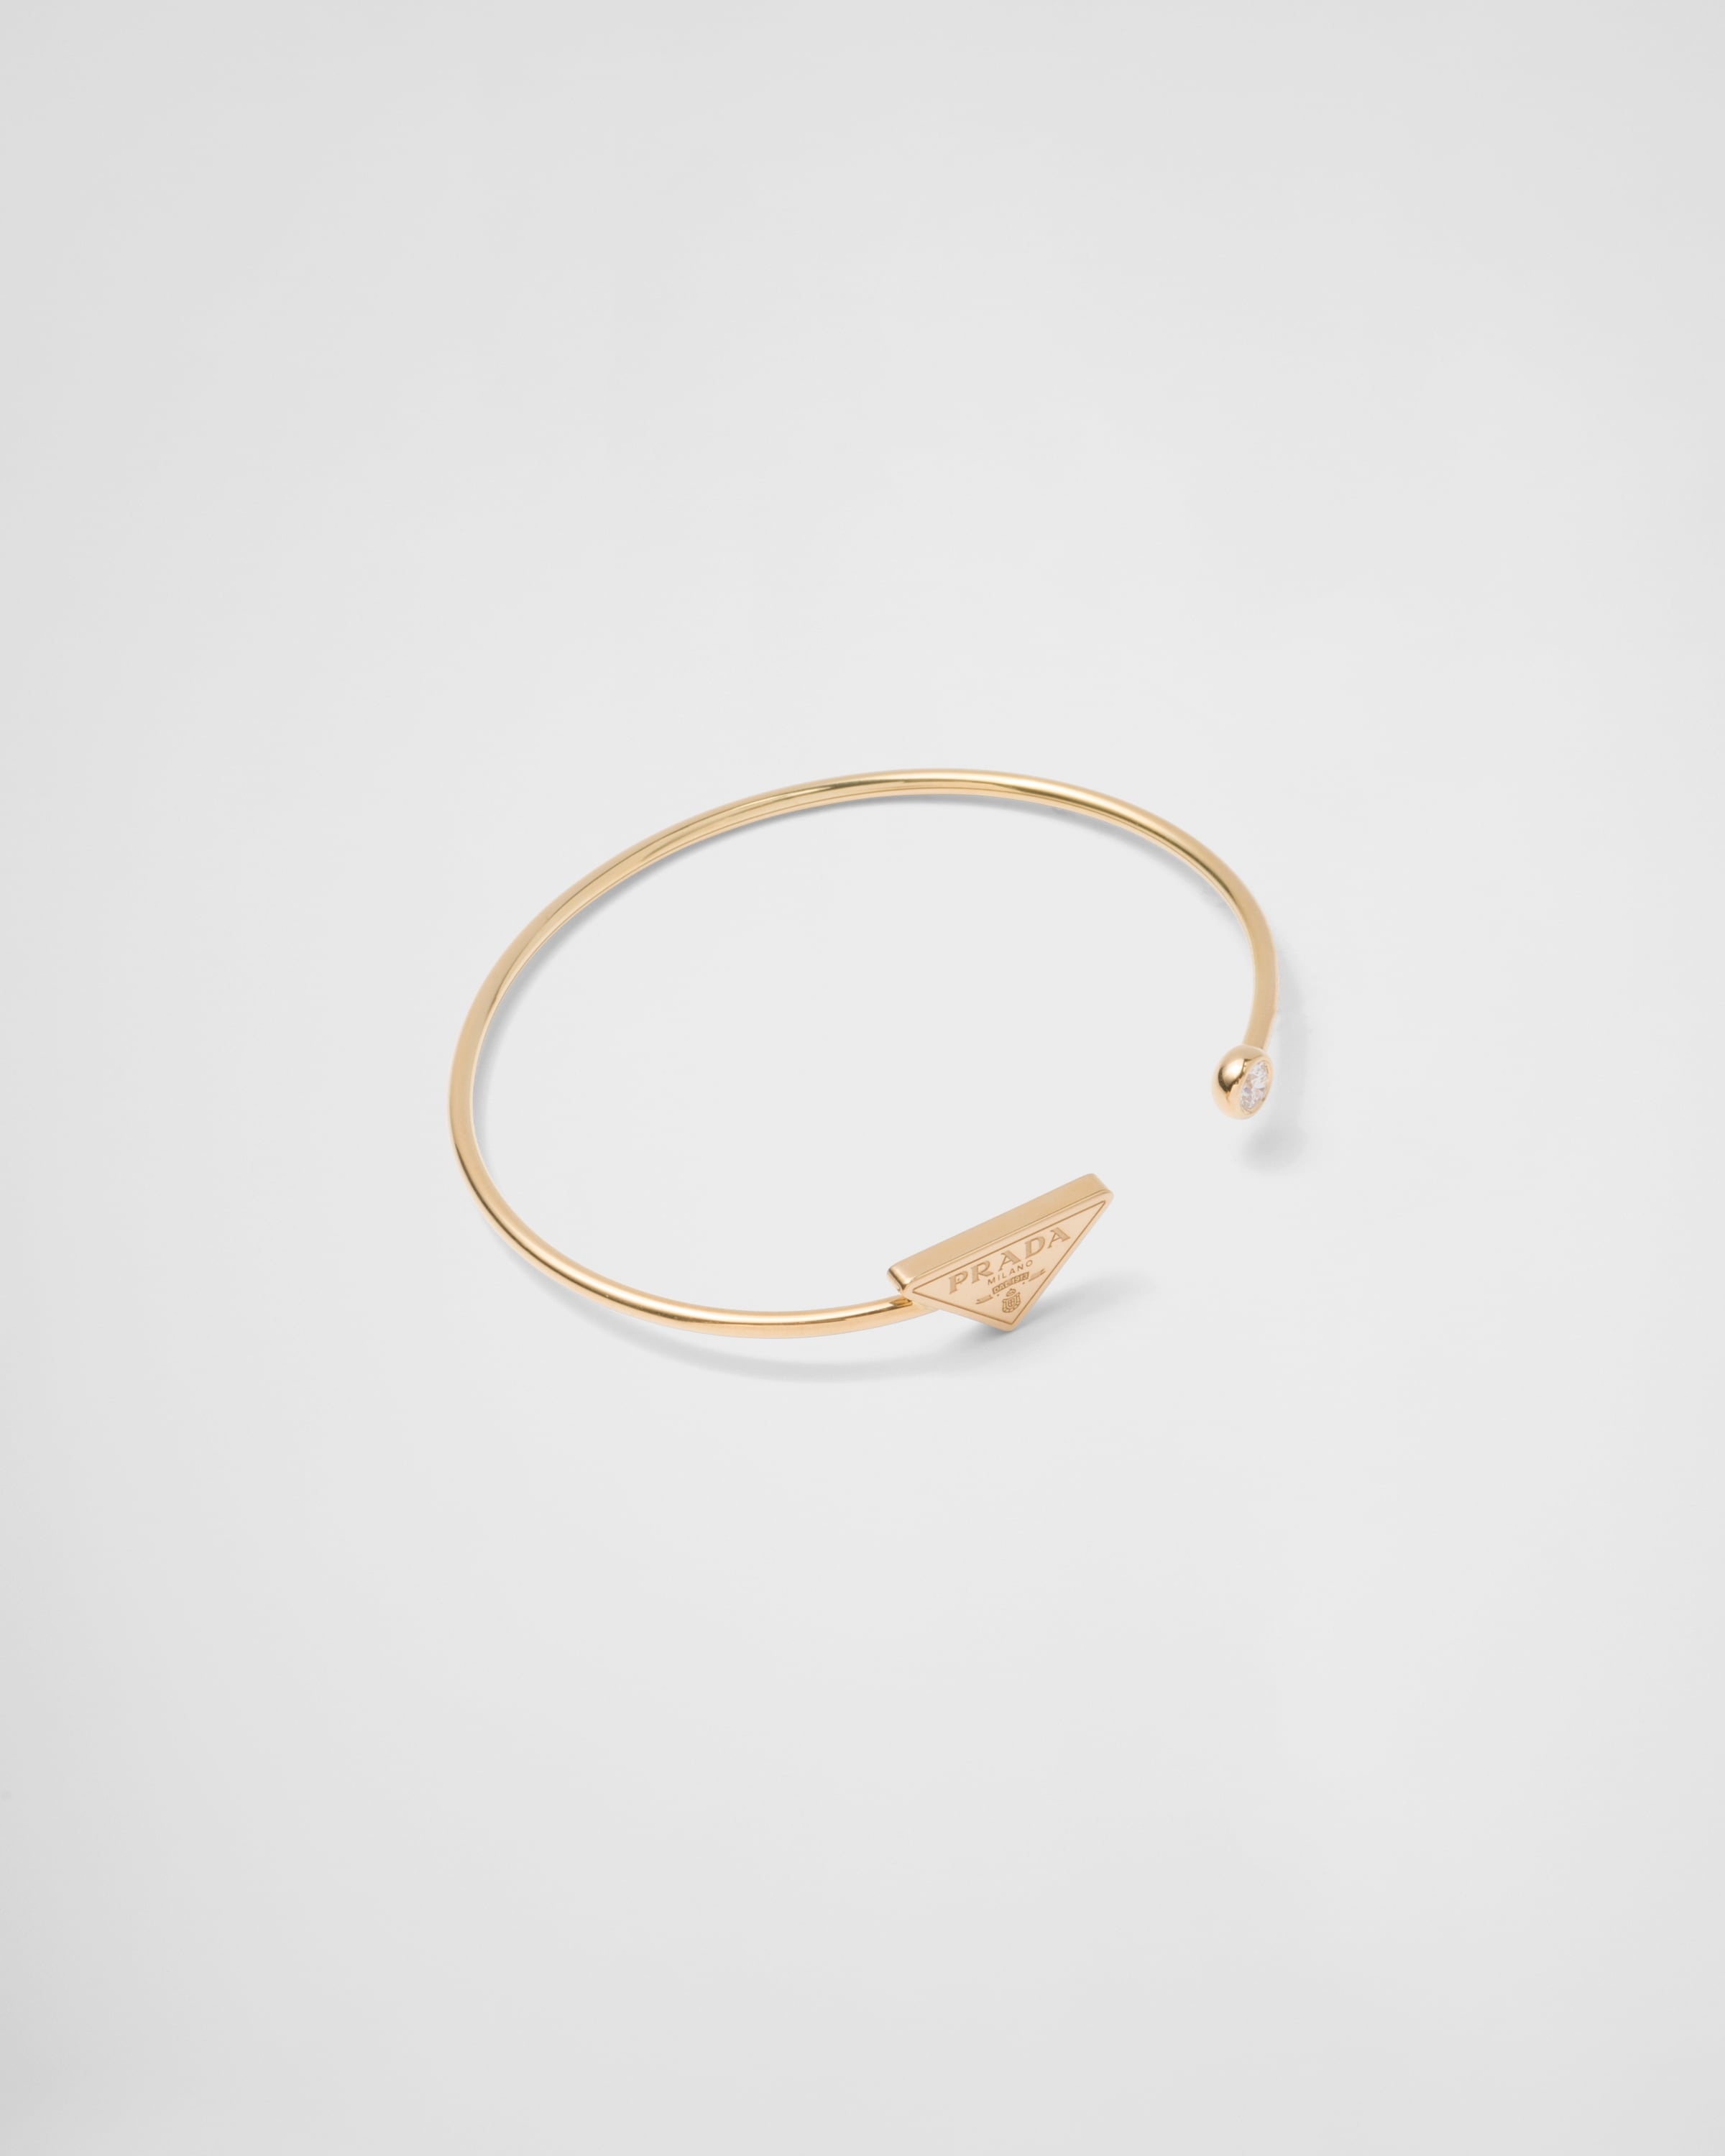 Eternal Gold bangle bracelet in yellow gold with diamond - 1